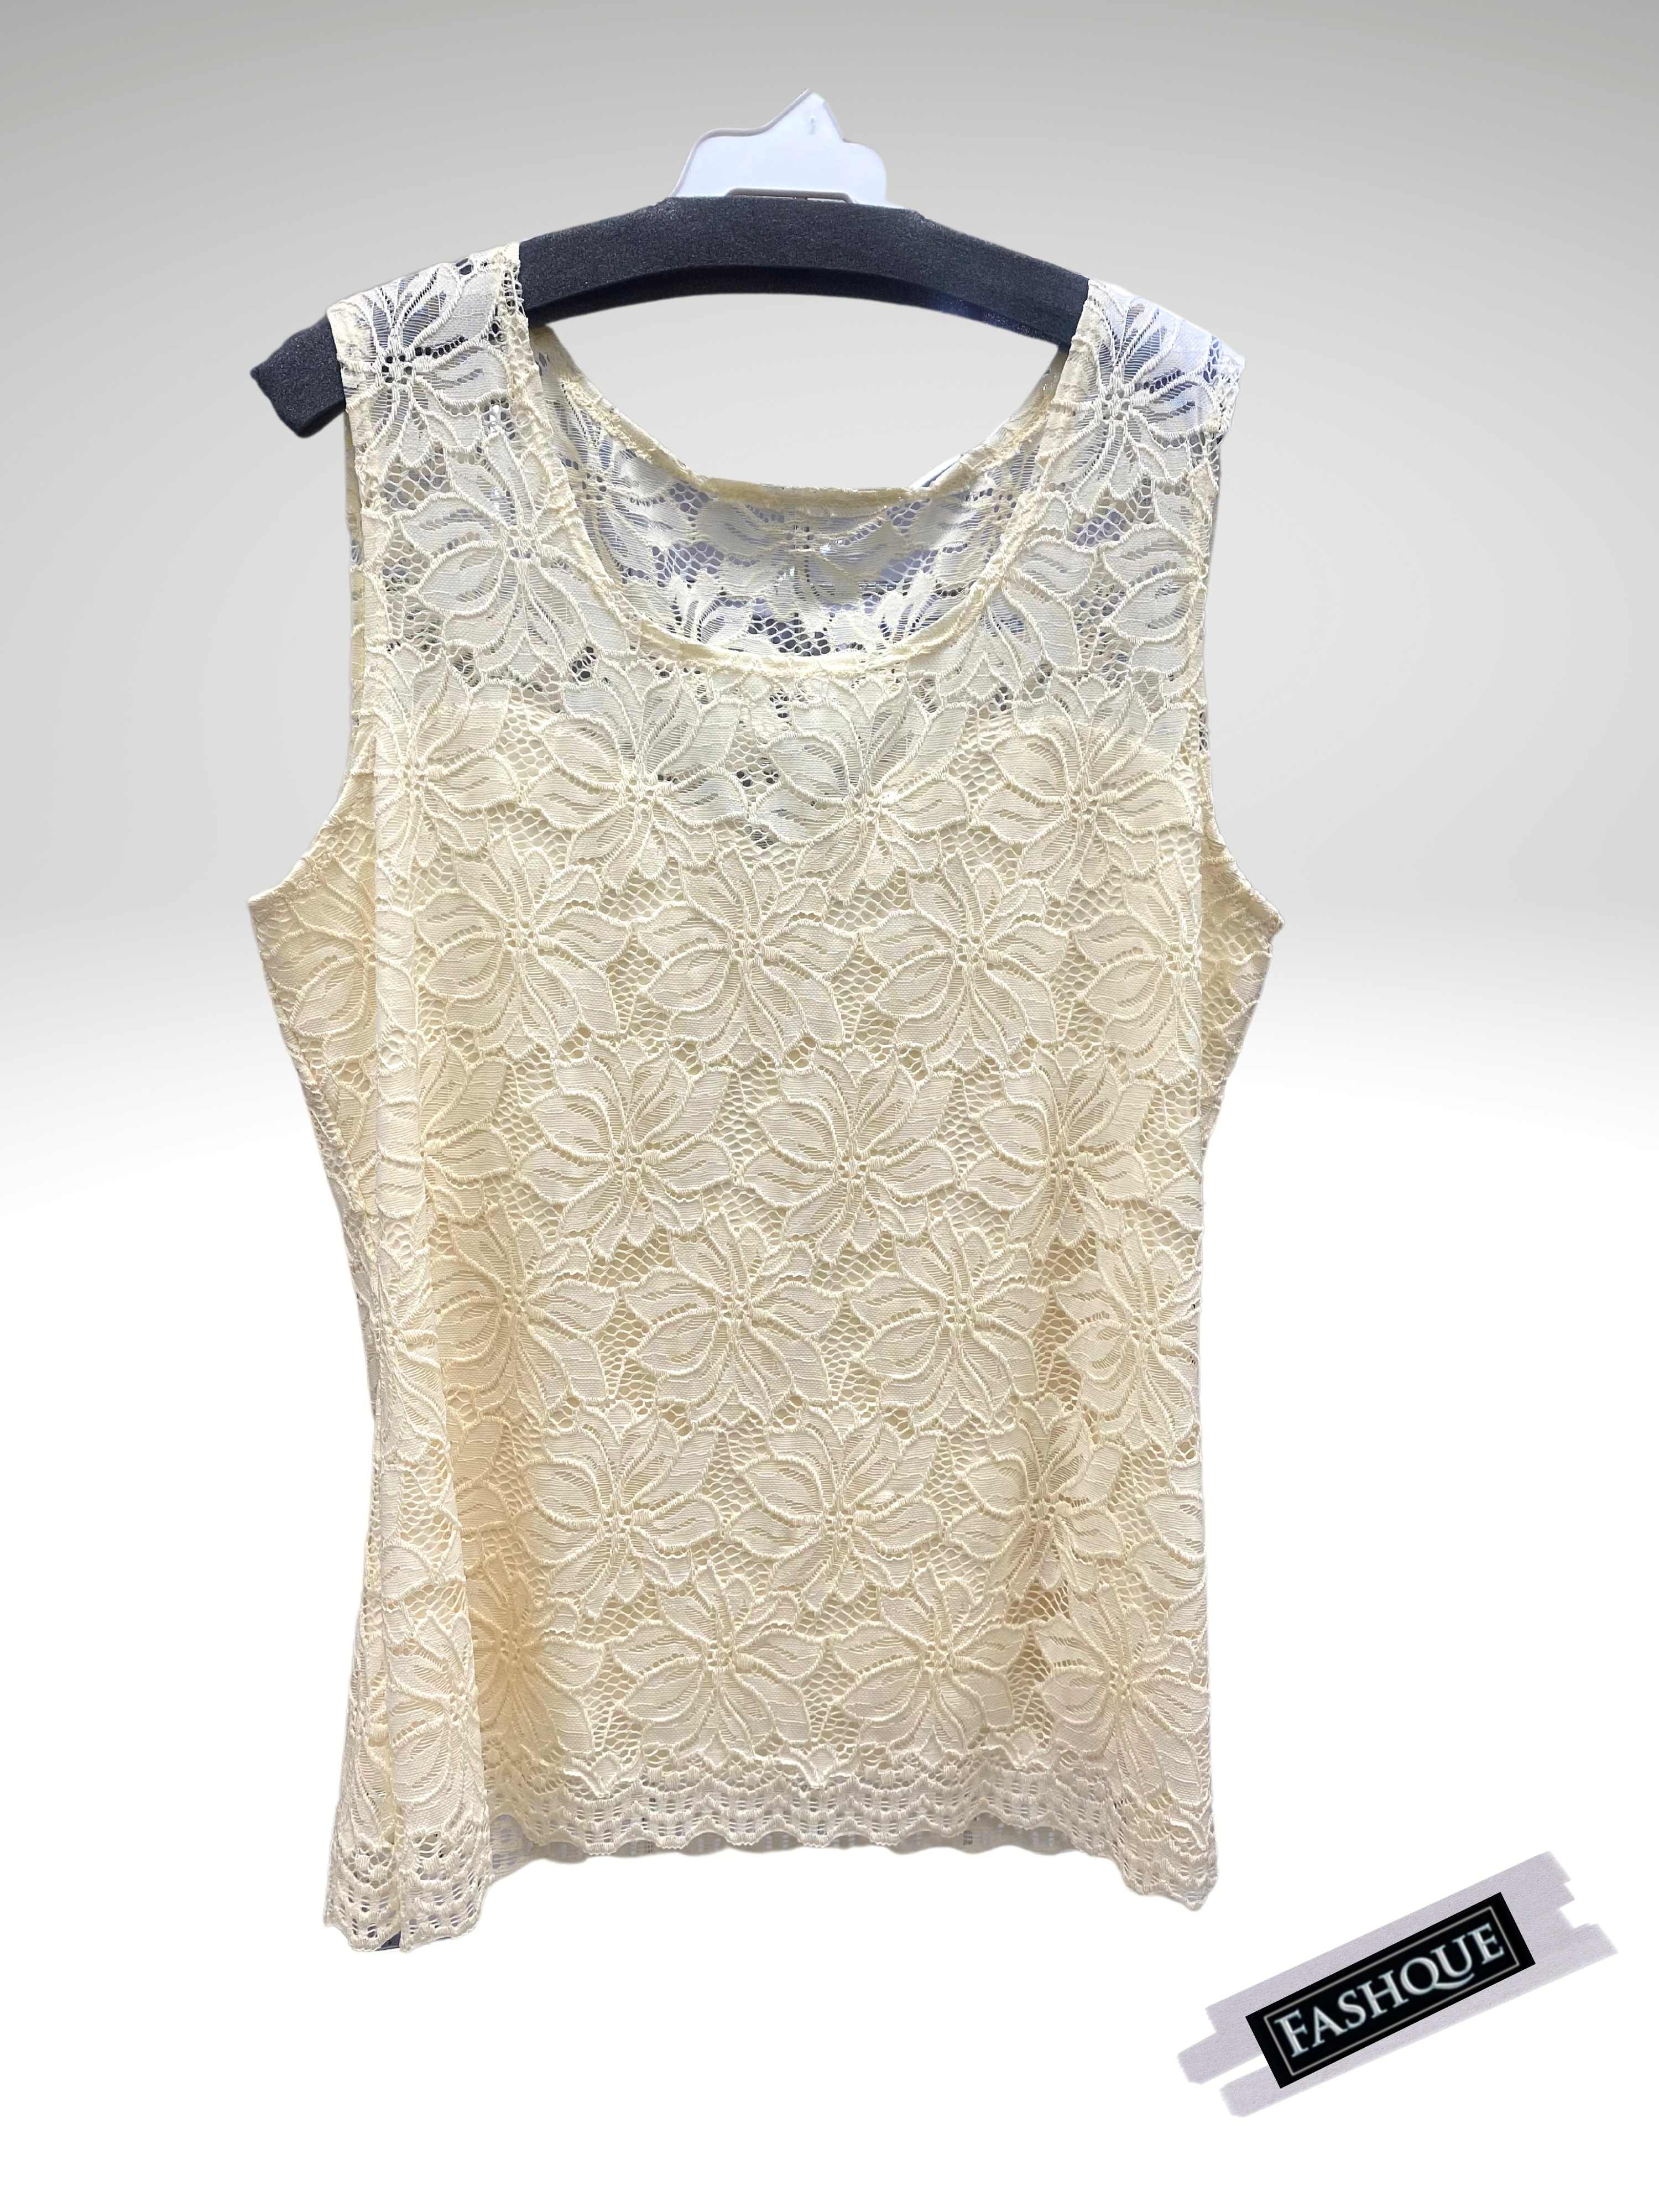 FASHQUE - Lace layering with lining inside sleeveless knit Tunic Top - T329